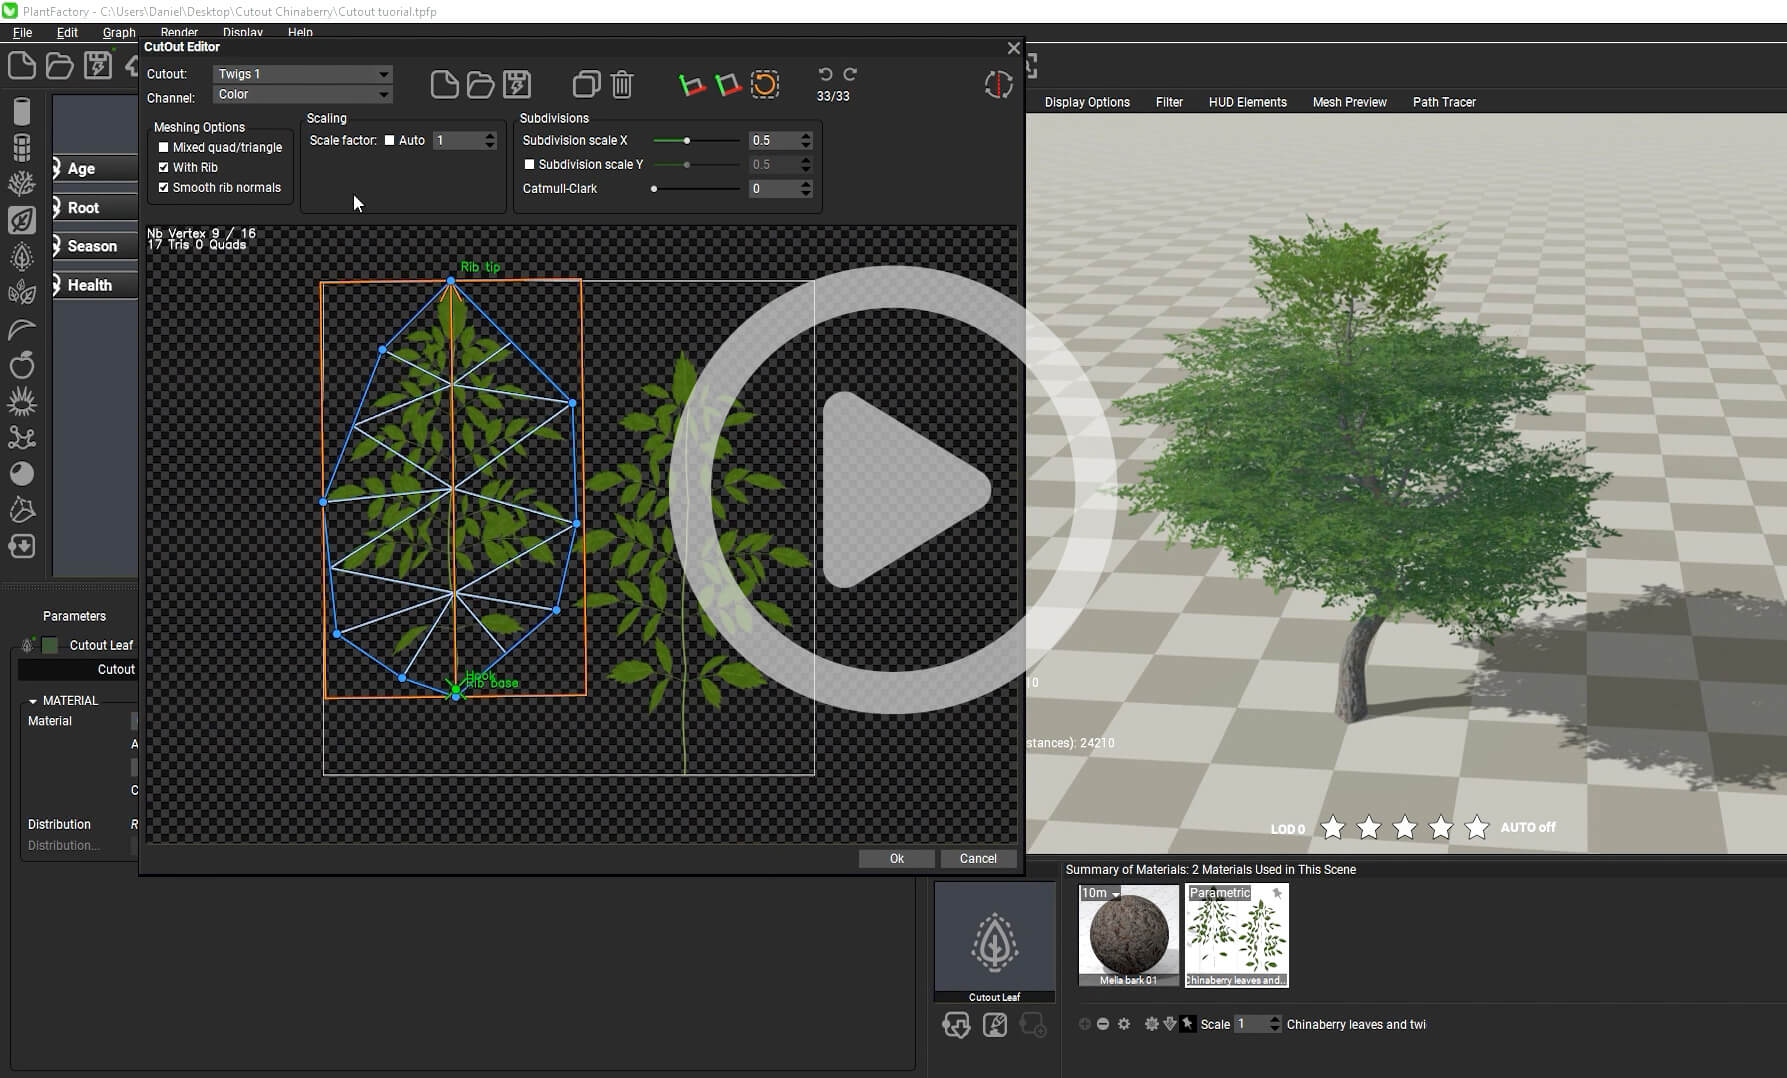 Watch the course on the cutout leaf node in the learning center